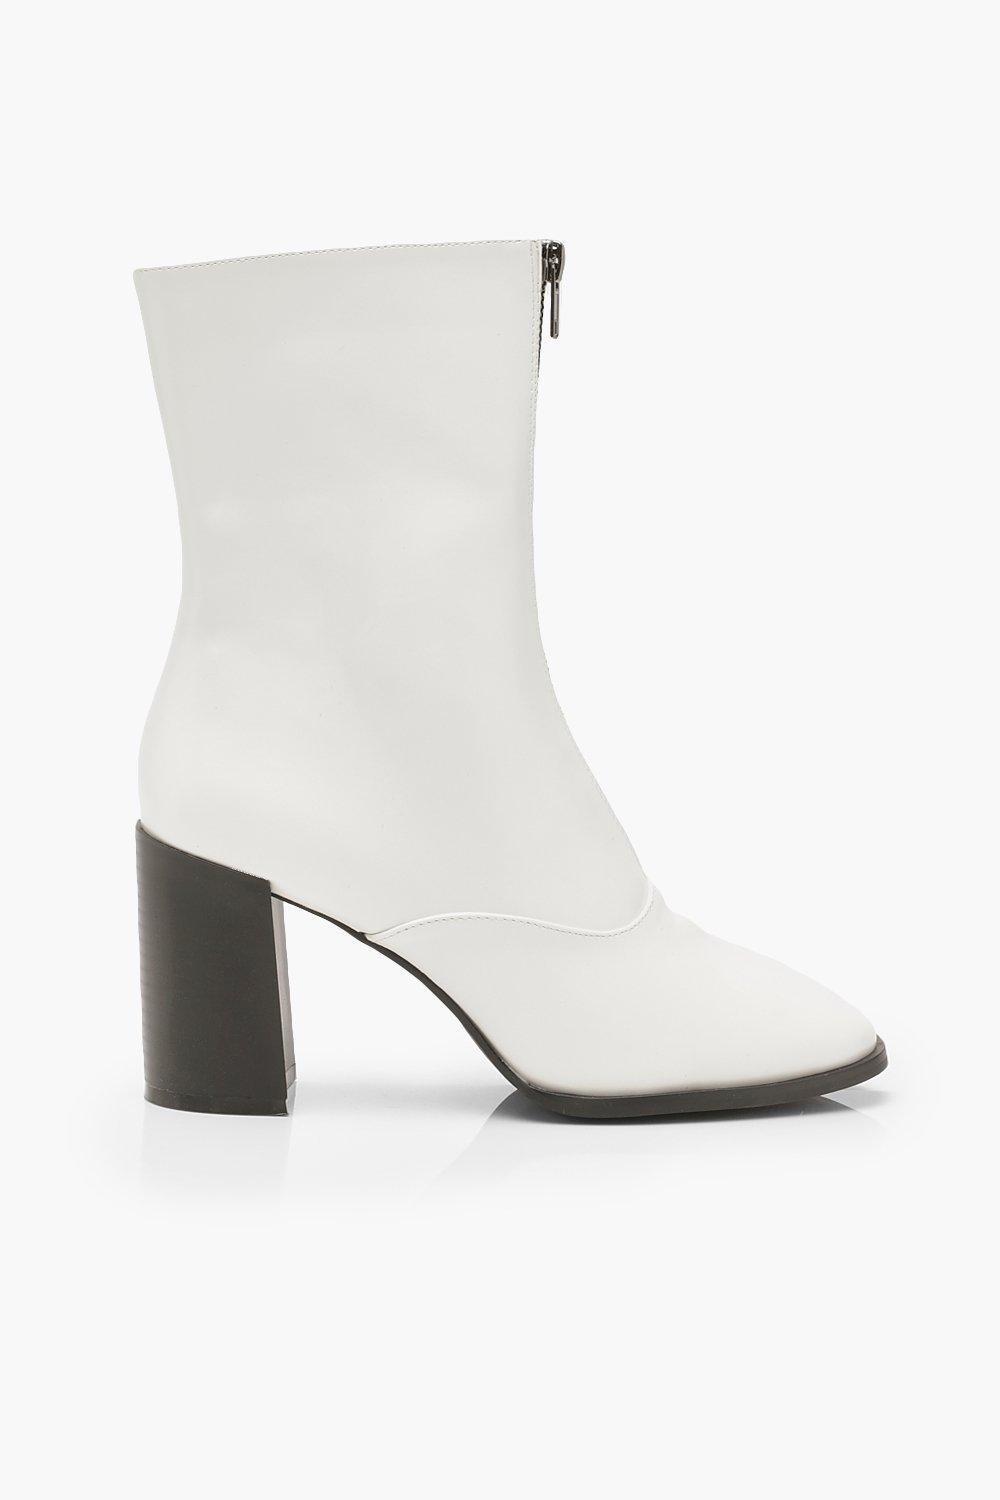 white boots with black heel